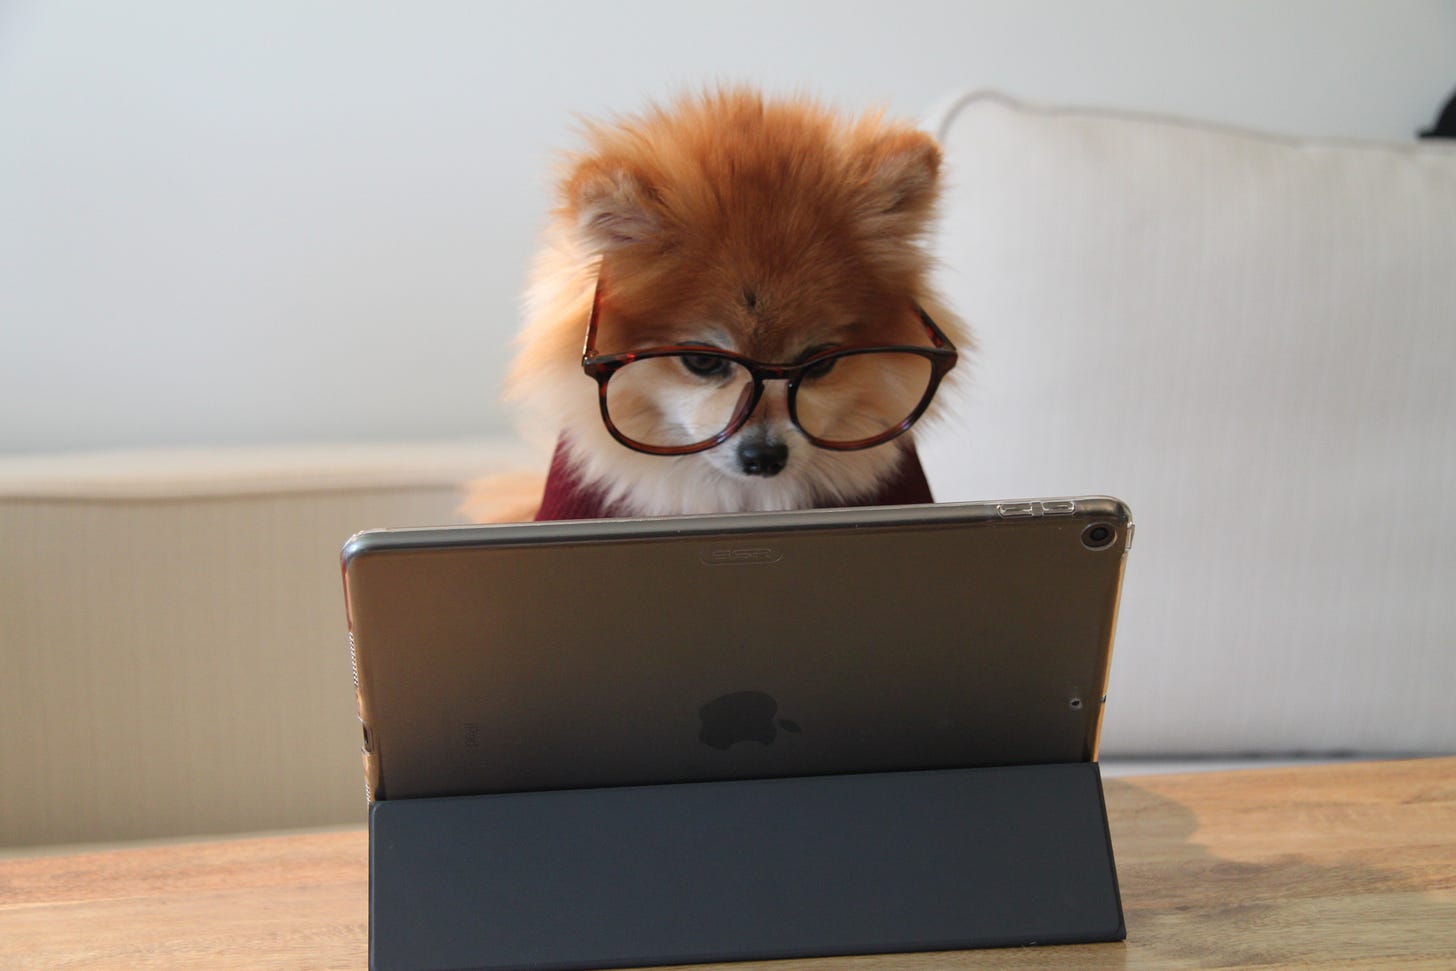 A red Pomeranian dog is wearing glasses and looking at an iPad 